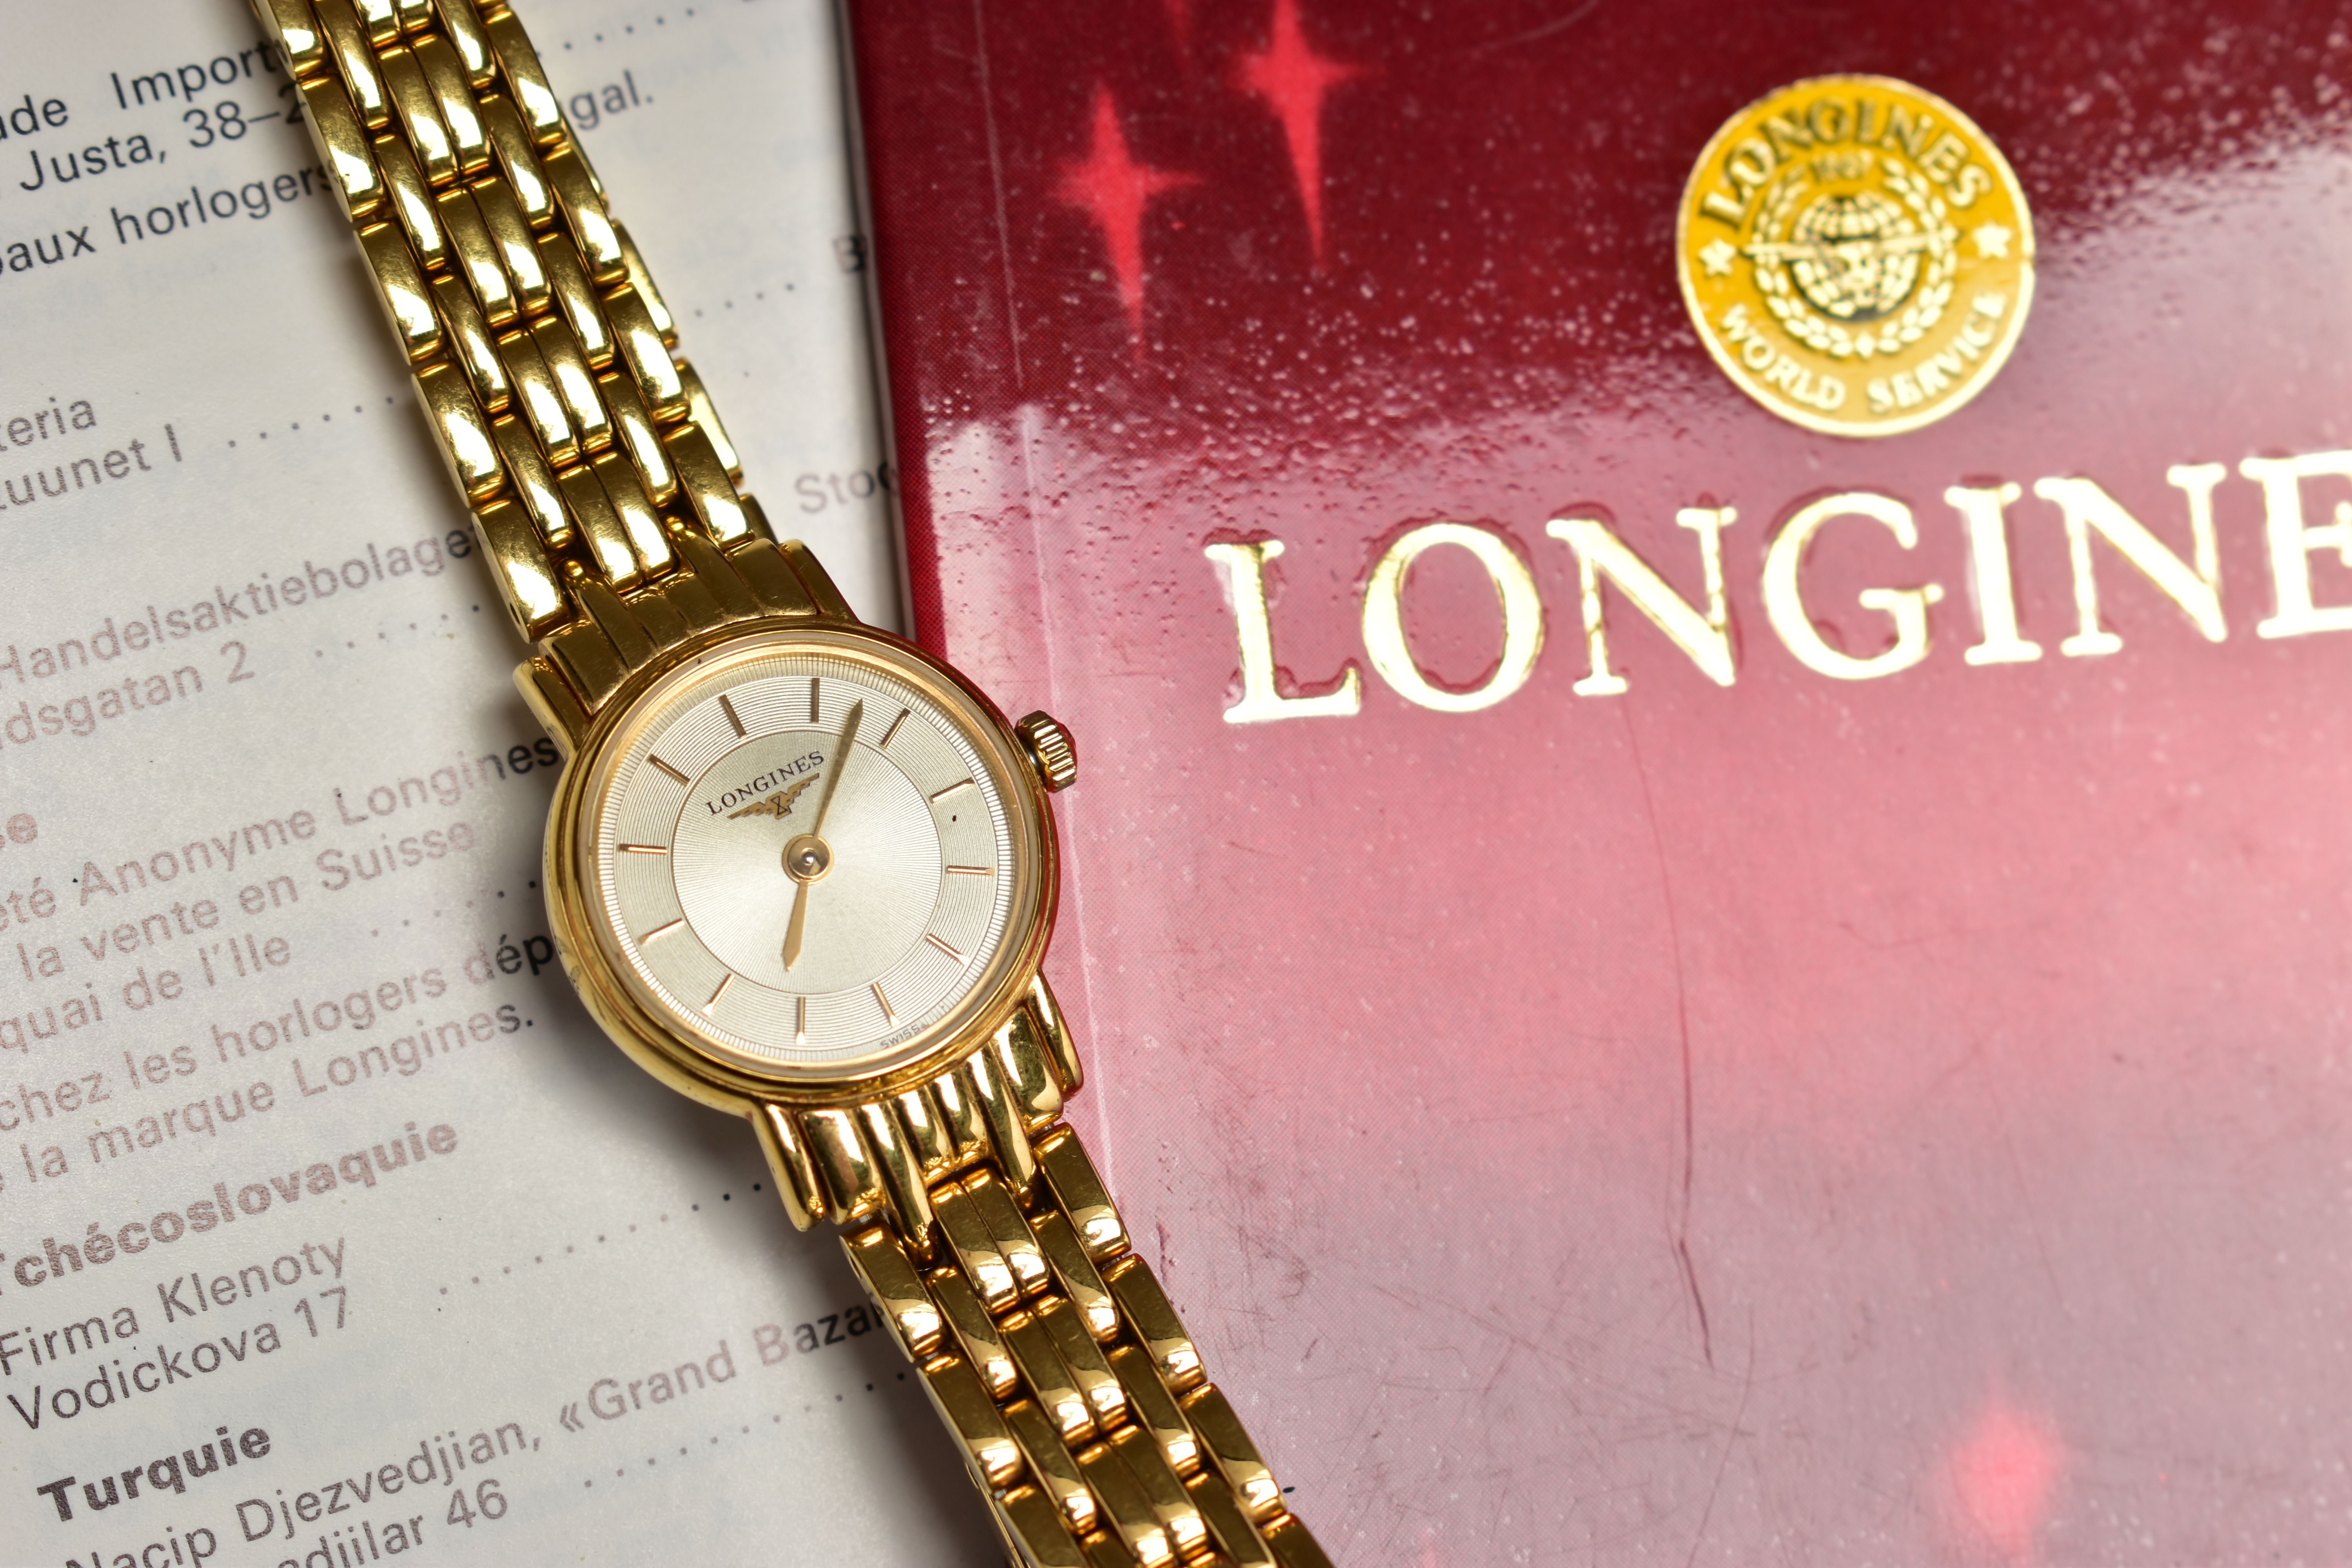 A LADIES AND A GENTS 'LONGINES' WRISTWATCH, a gents quartz watch featuring a round gold dial - Image 2 of 4